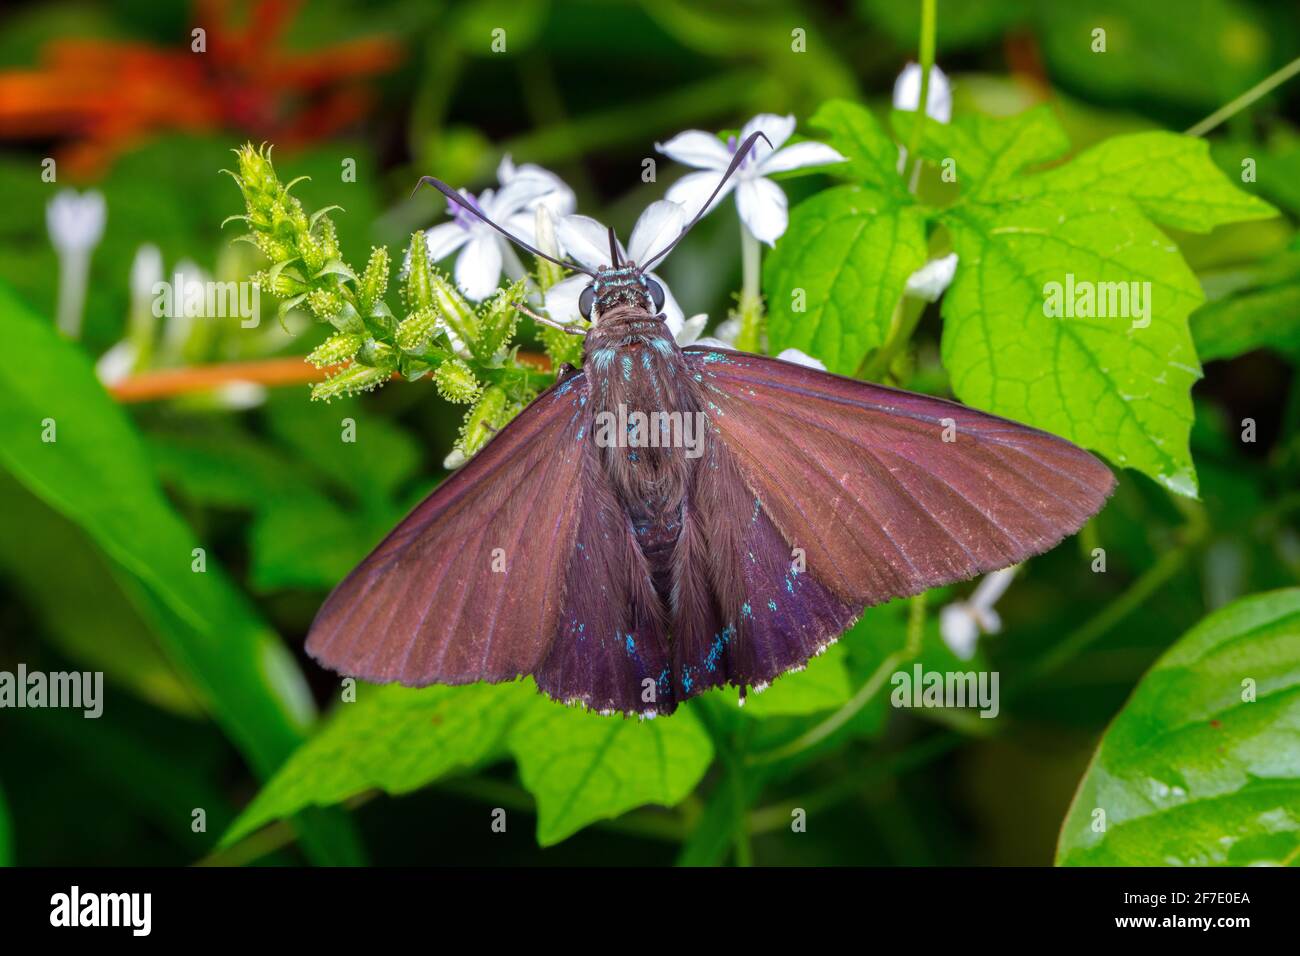 A mangrove skipper, Phocides pigmalion, nectaring a white flower. Stock Photo